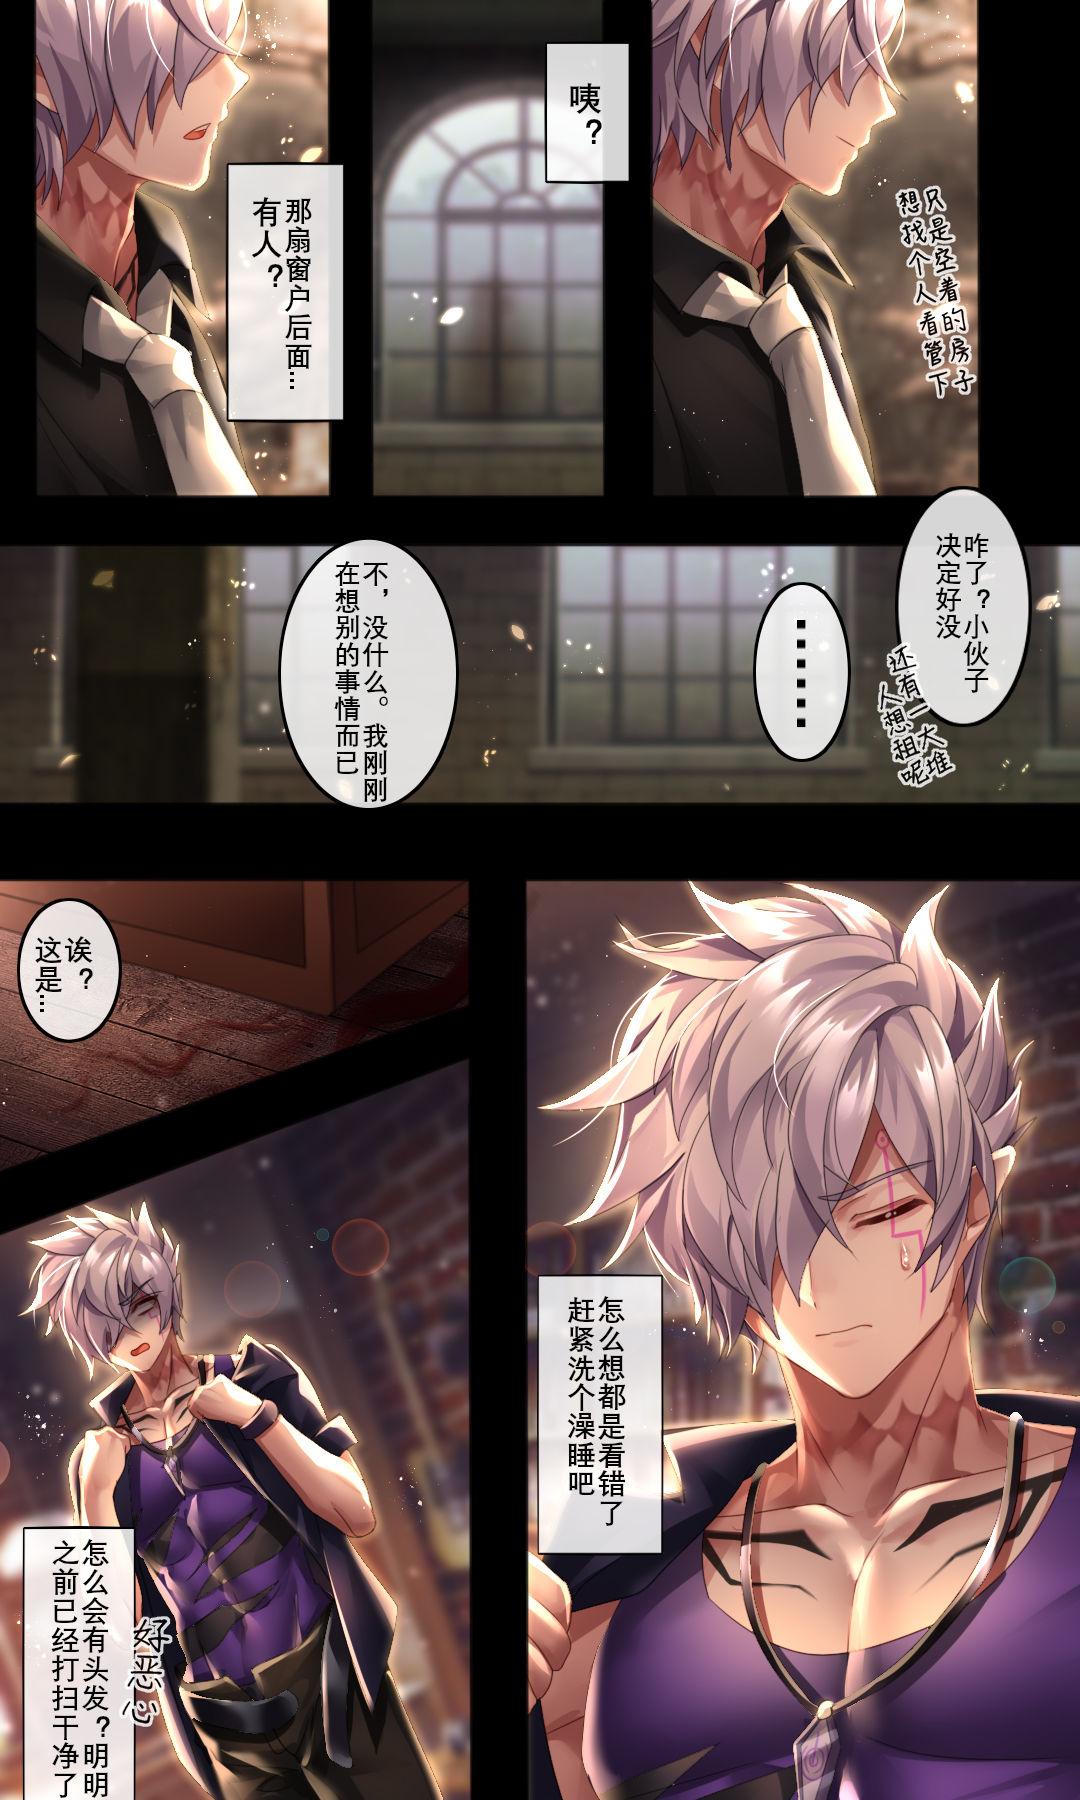 Best Blowjobs Ever 伏鬼 - Elsword Magrinha - Page 4